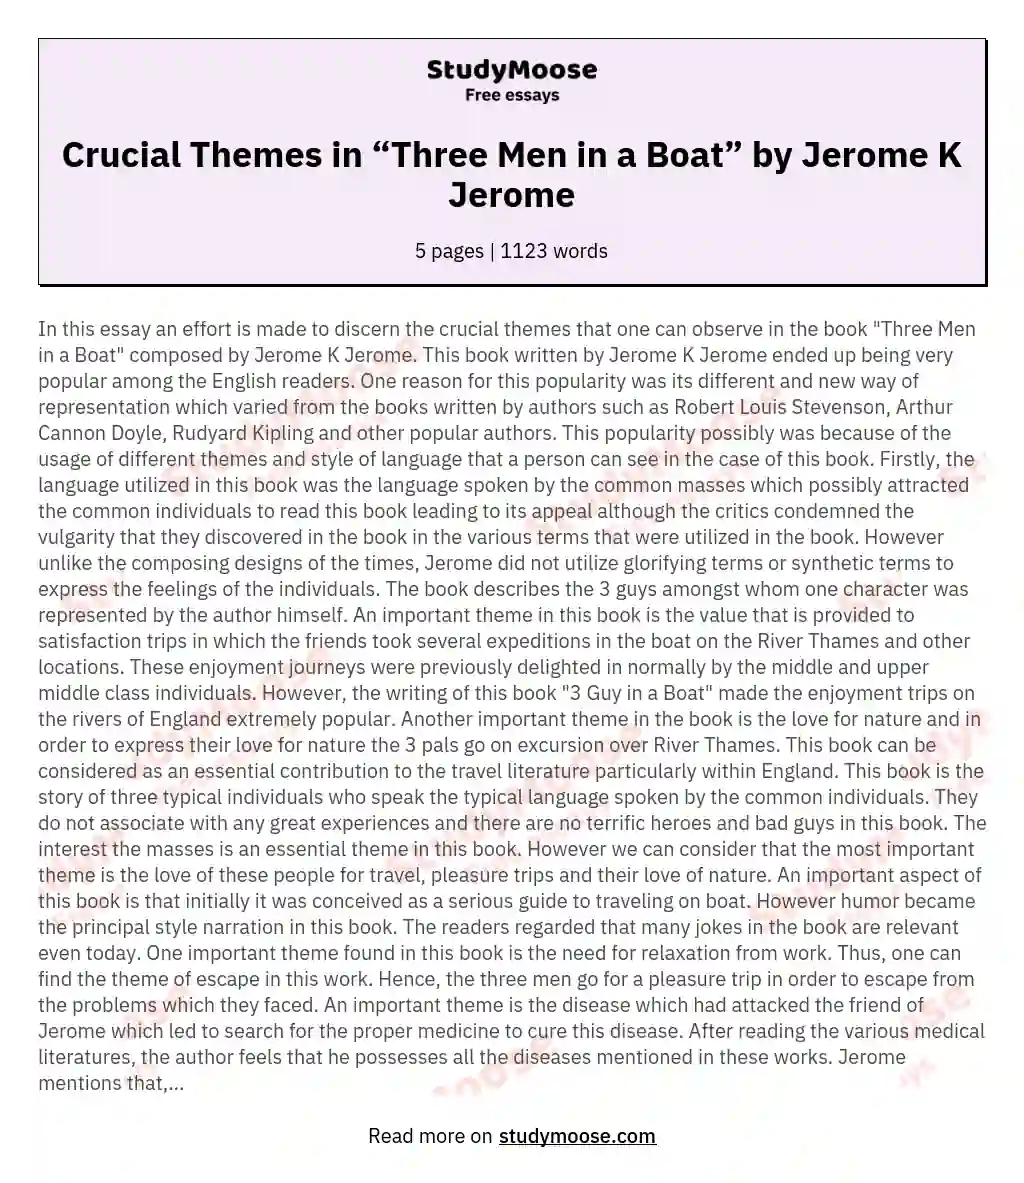 Crucial Themes in “Three Men in a Boat” by Jerome K Jerome